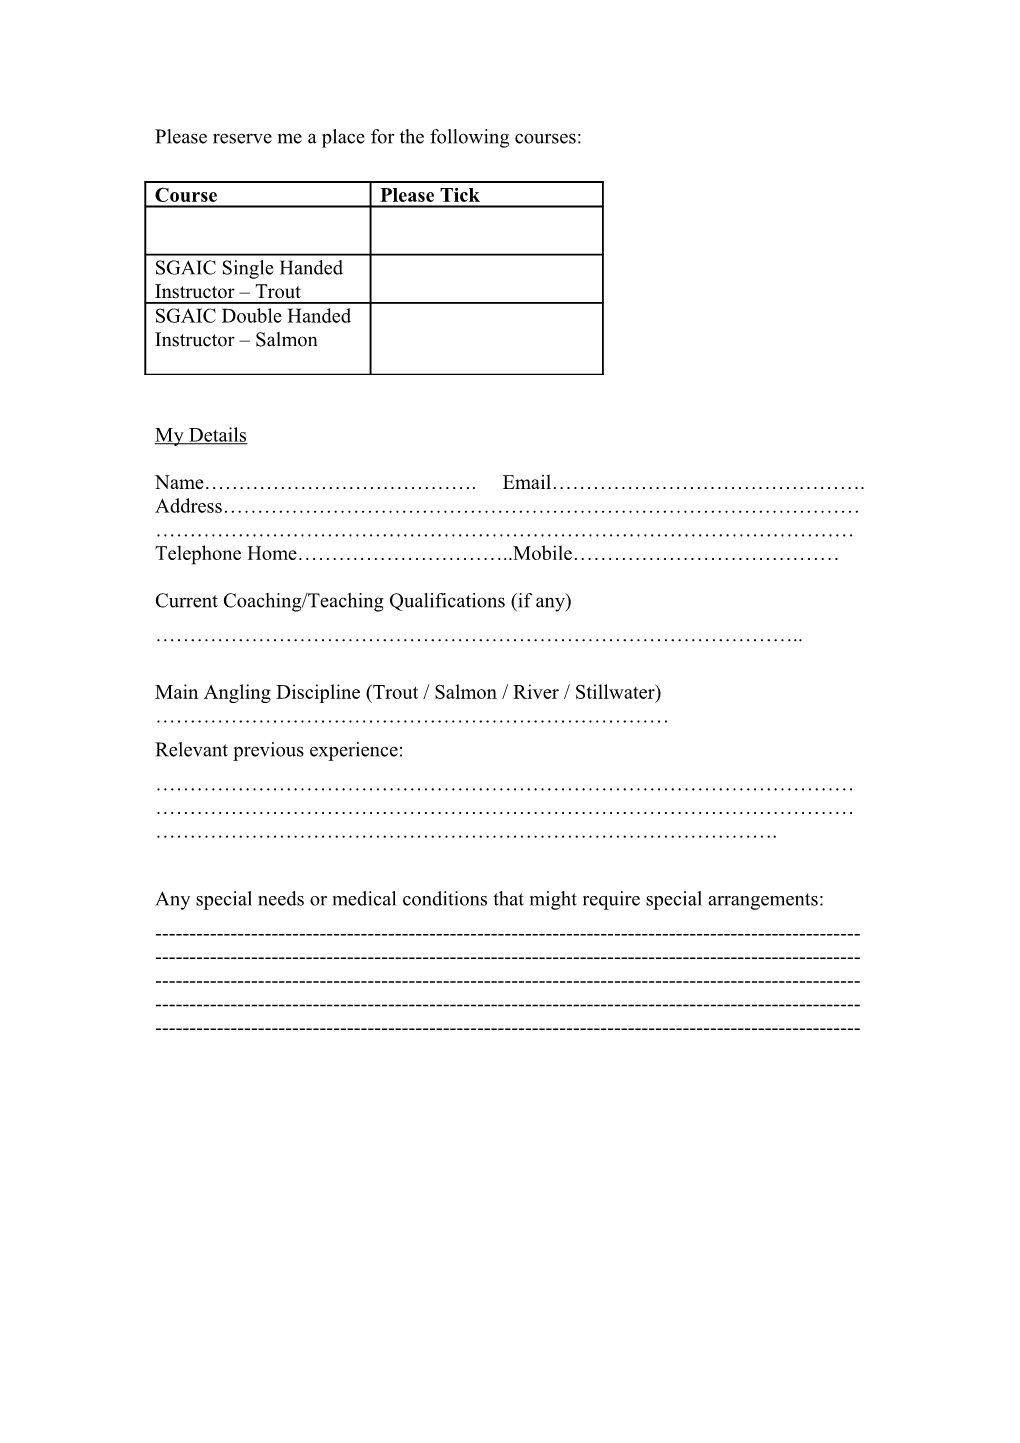 2006 /7 SANA Licensed Coaching Training Schedule -Application Form